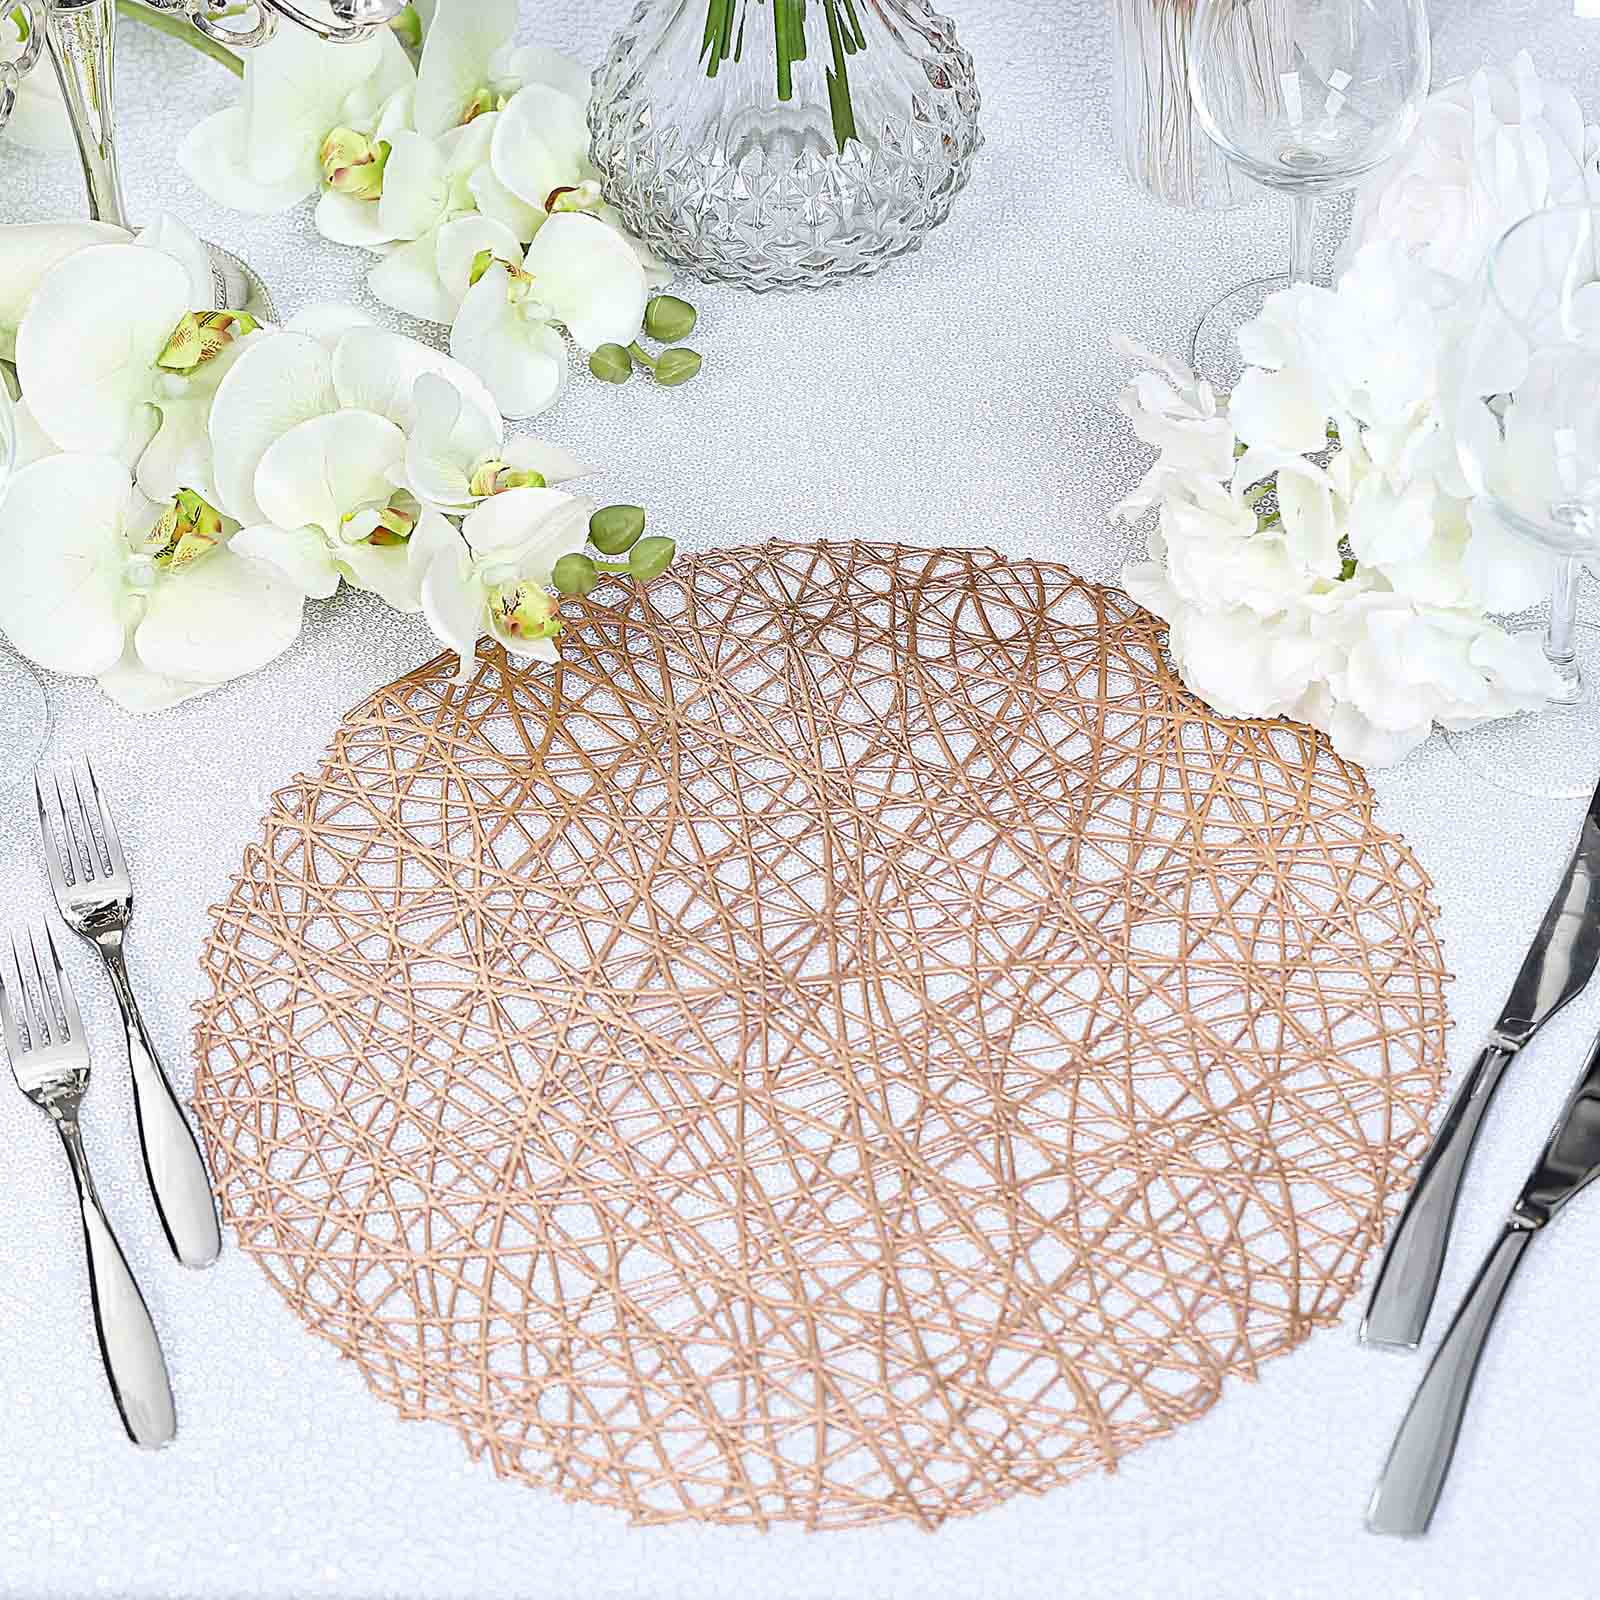 FFY Go Placemats Rose Gold Place Mats Dining Table Mats Waterproof Non-slip Nonstick Heat Resistant Christmas Decoration 4pcs 